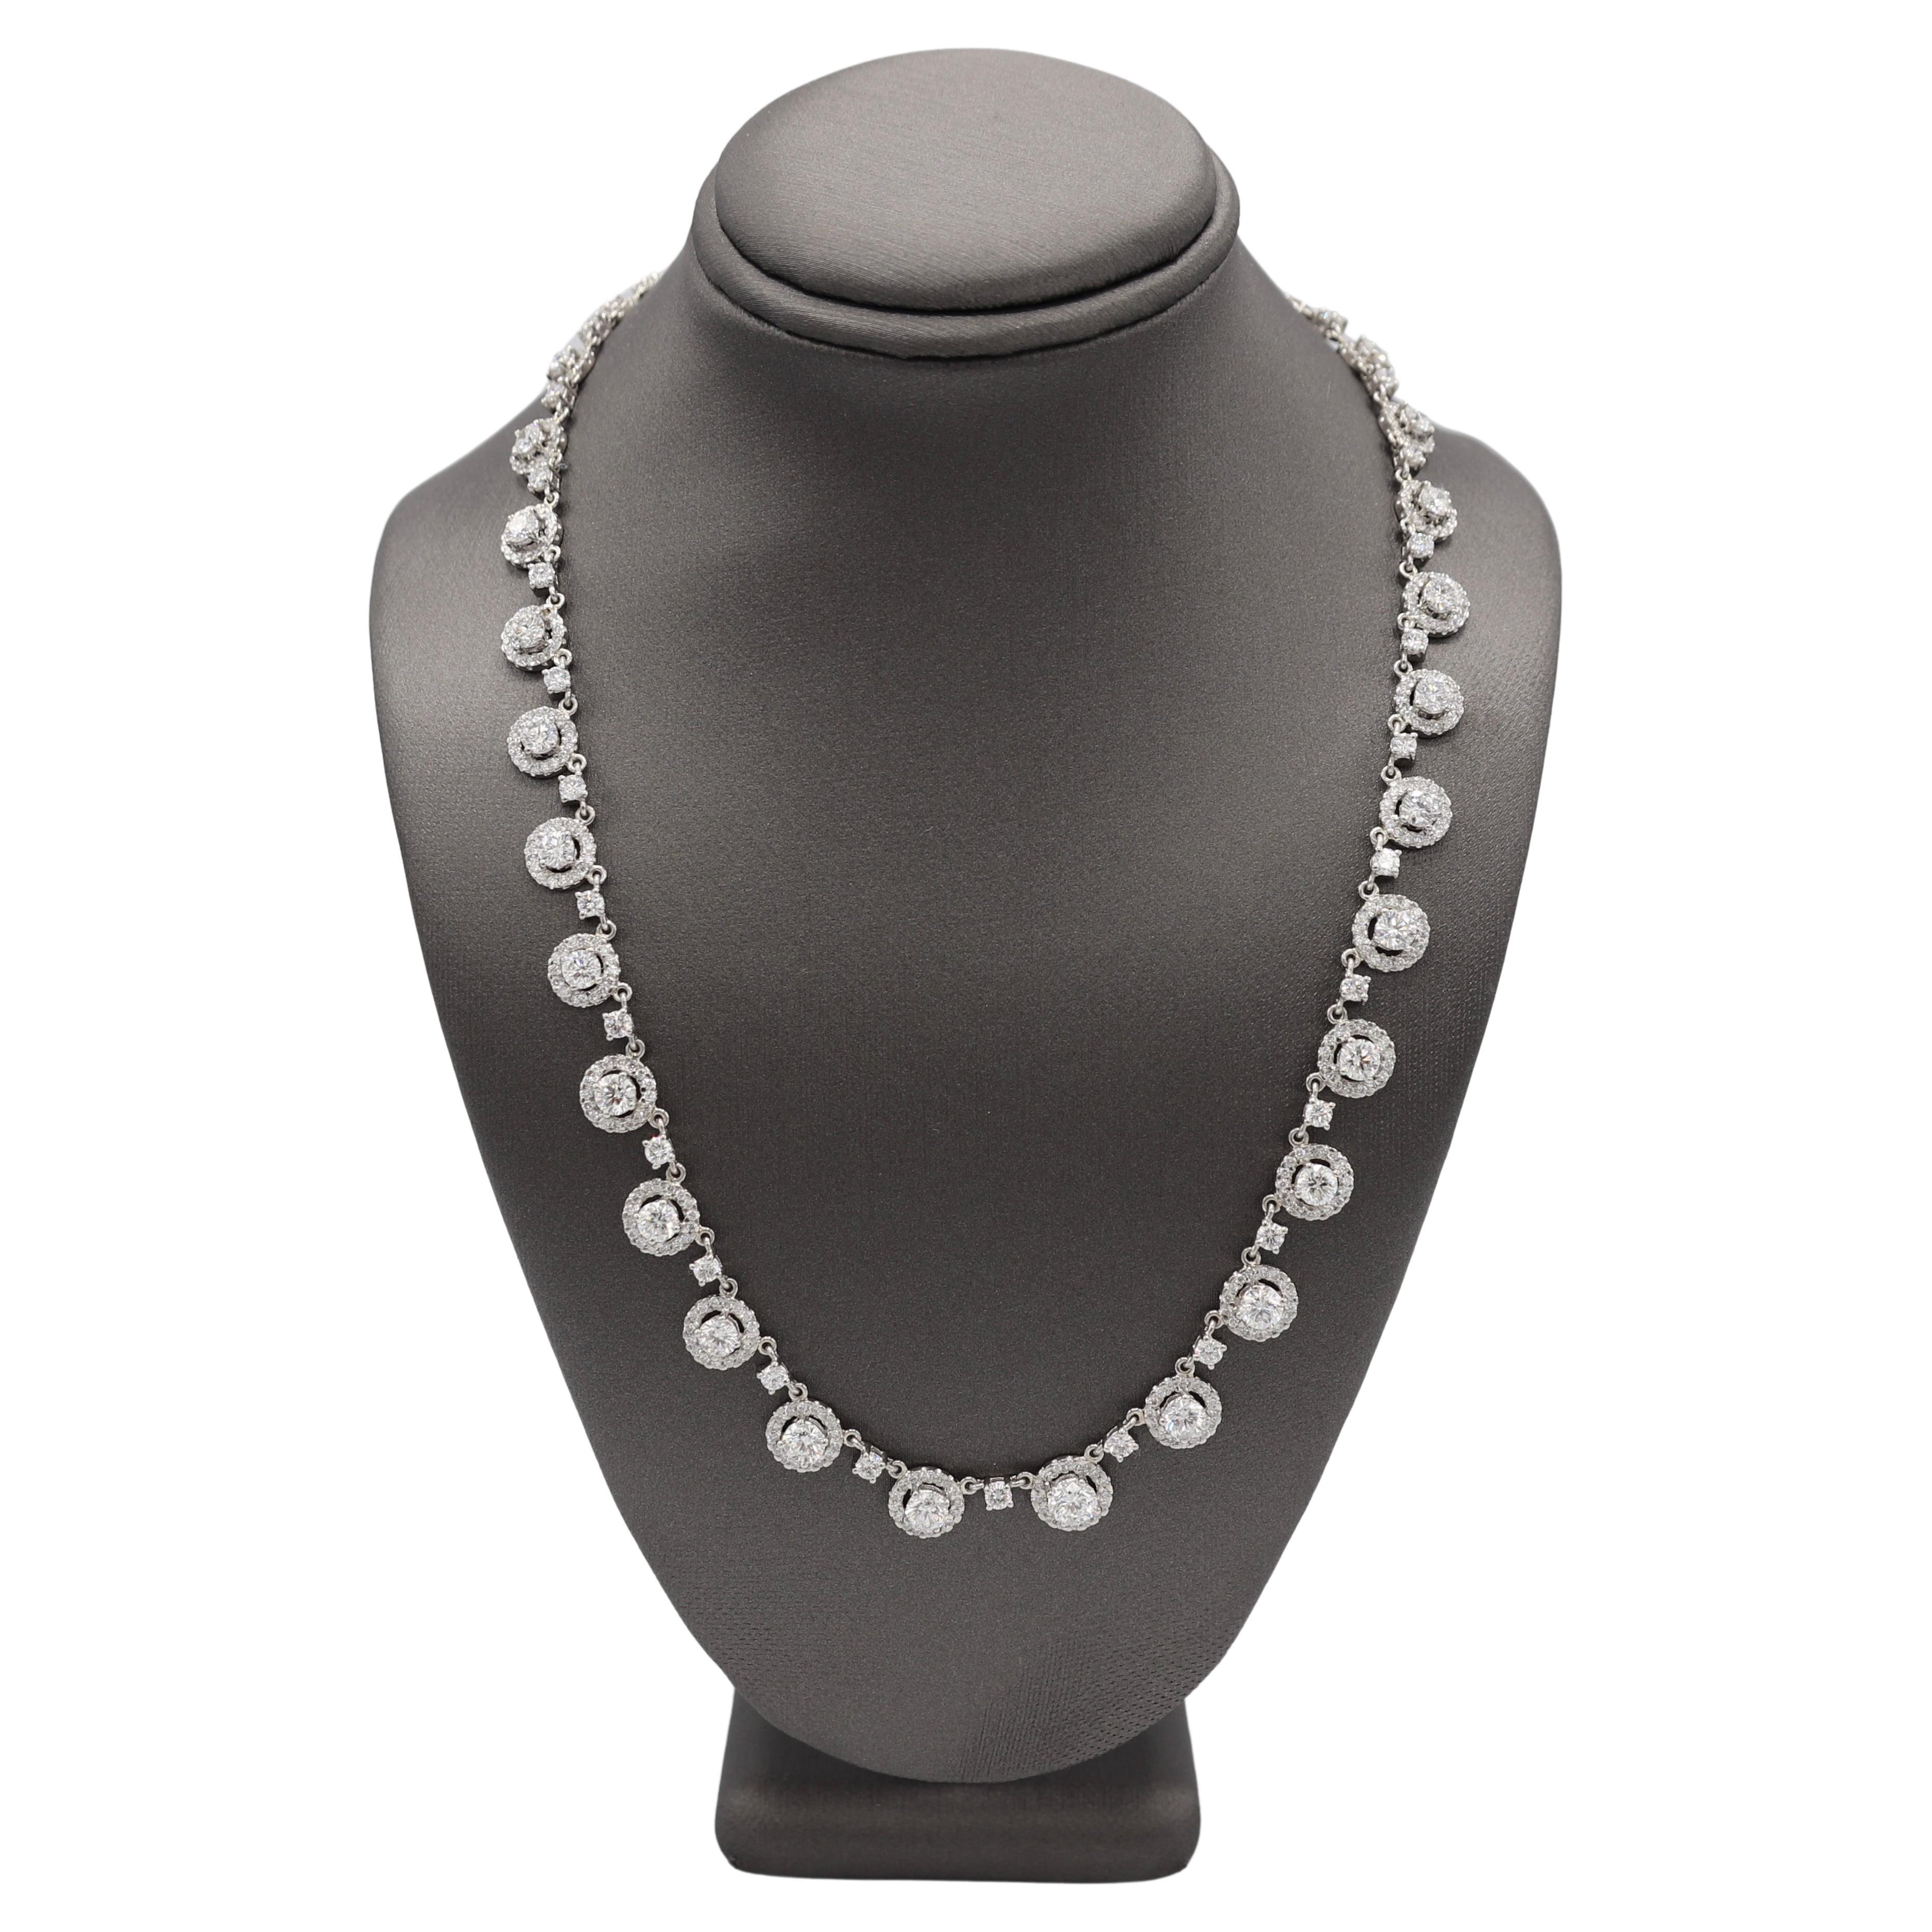 Platinum 11.71 Carat Natural Diamond Halo Riviera Necklace 
Metal: Platinum
Weight: 39.5 grams
Diamonds: 11.71 CTW natural round F-G VS diamonds. The largest diamond in the center is approx. .50cts. 
Length: 16 inches
